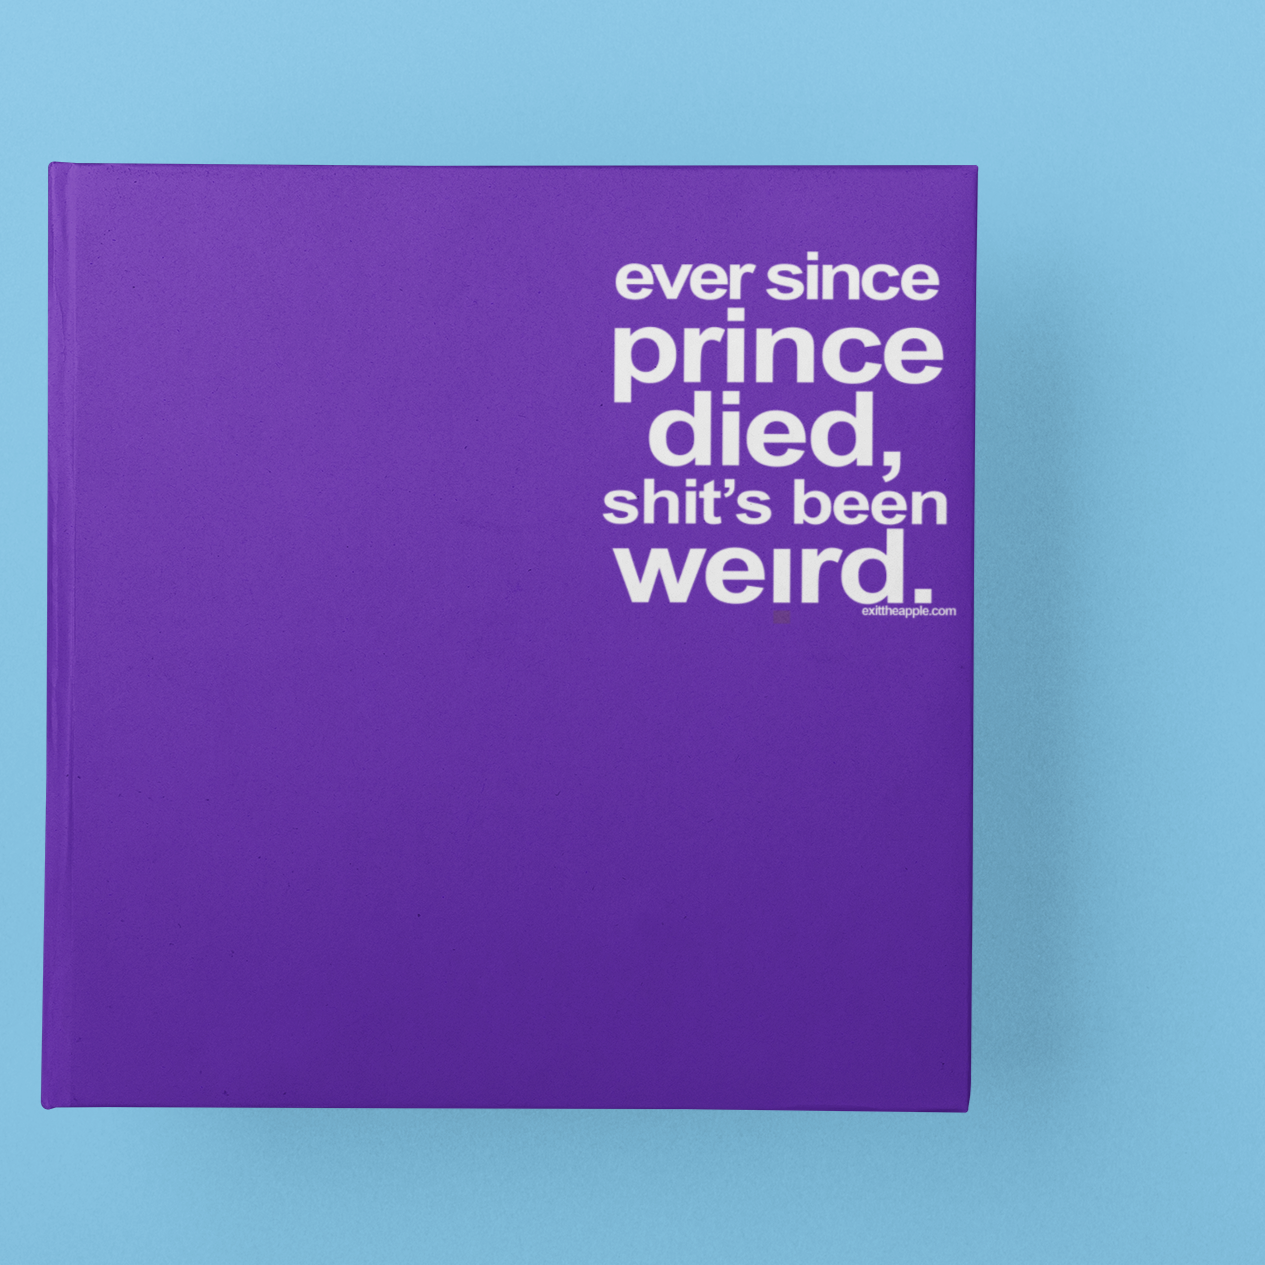 image: purple book on light blue background. text on book cover reads "ever since prince died, shit's been weird"